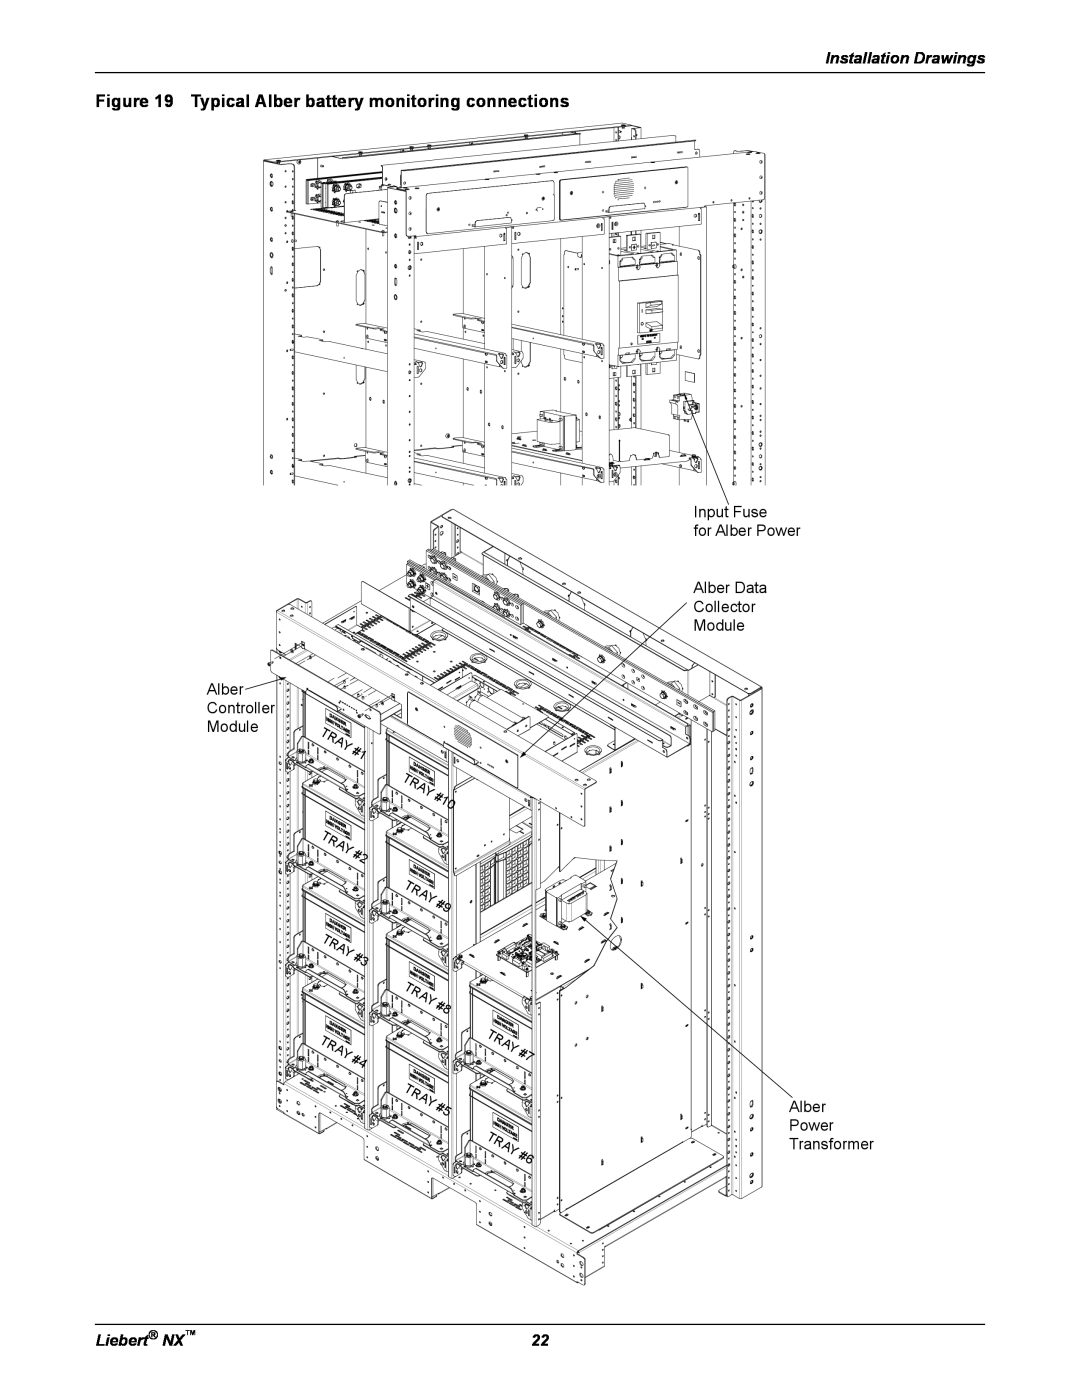 Emerson 225-600KVA installation manual Typical Alber battery monitoring connections, Controller, Module, Transformer 